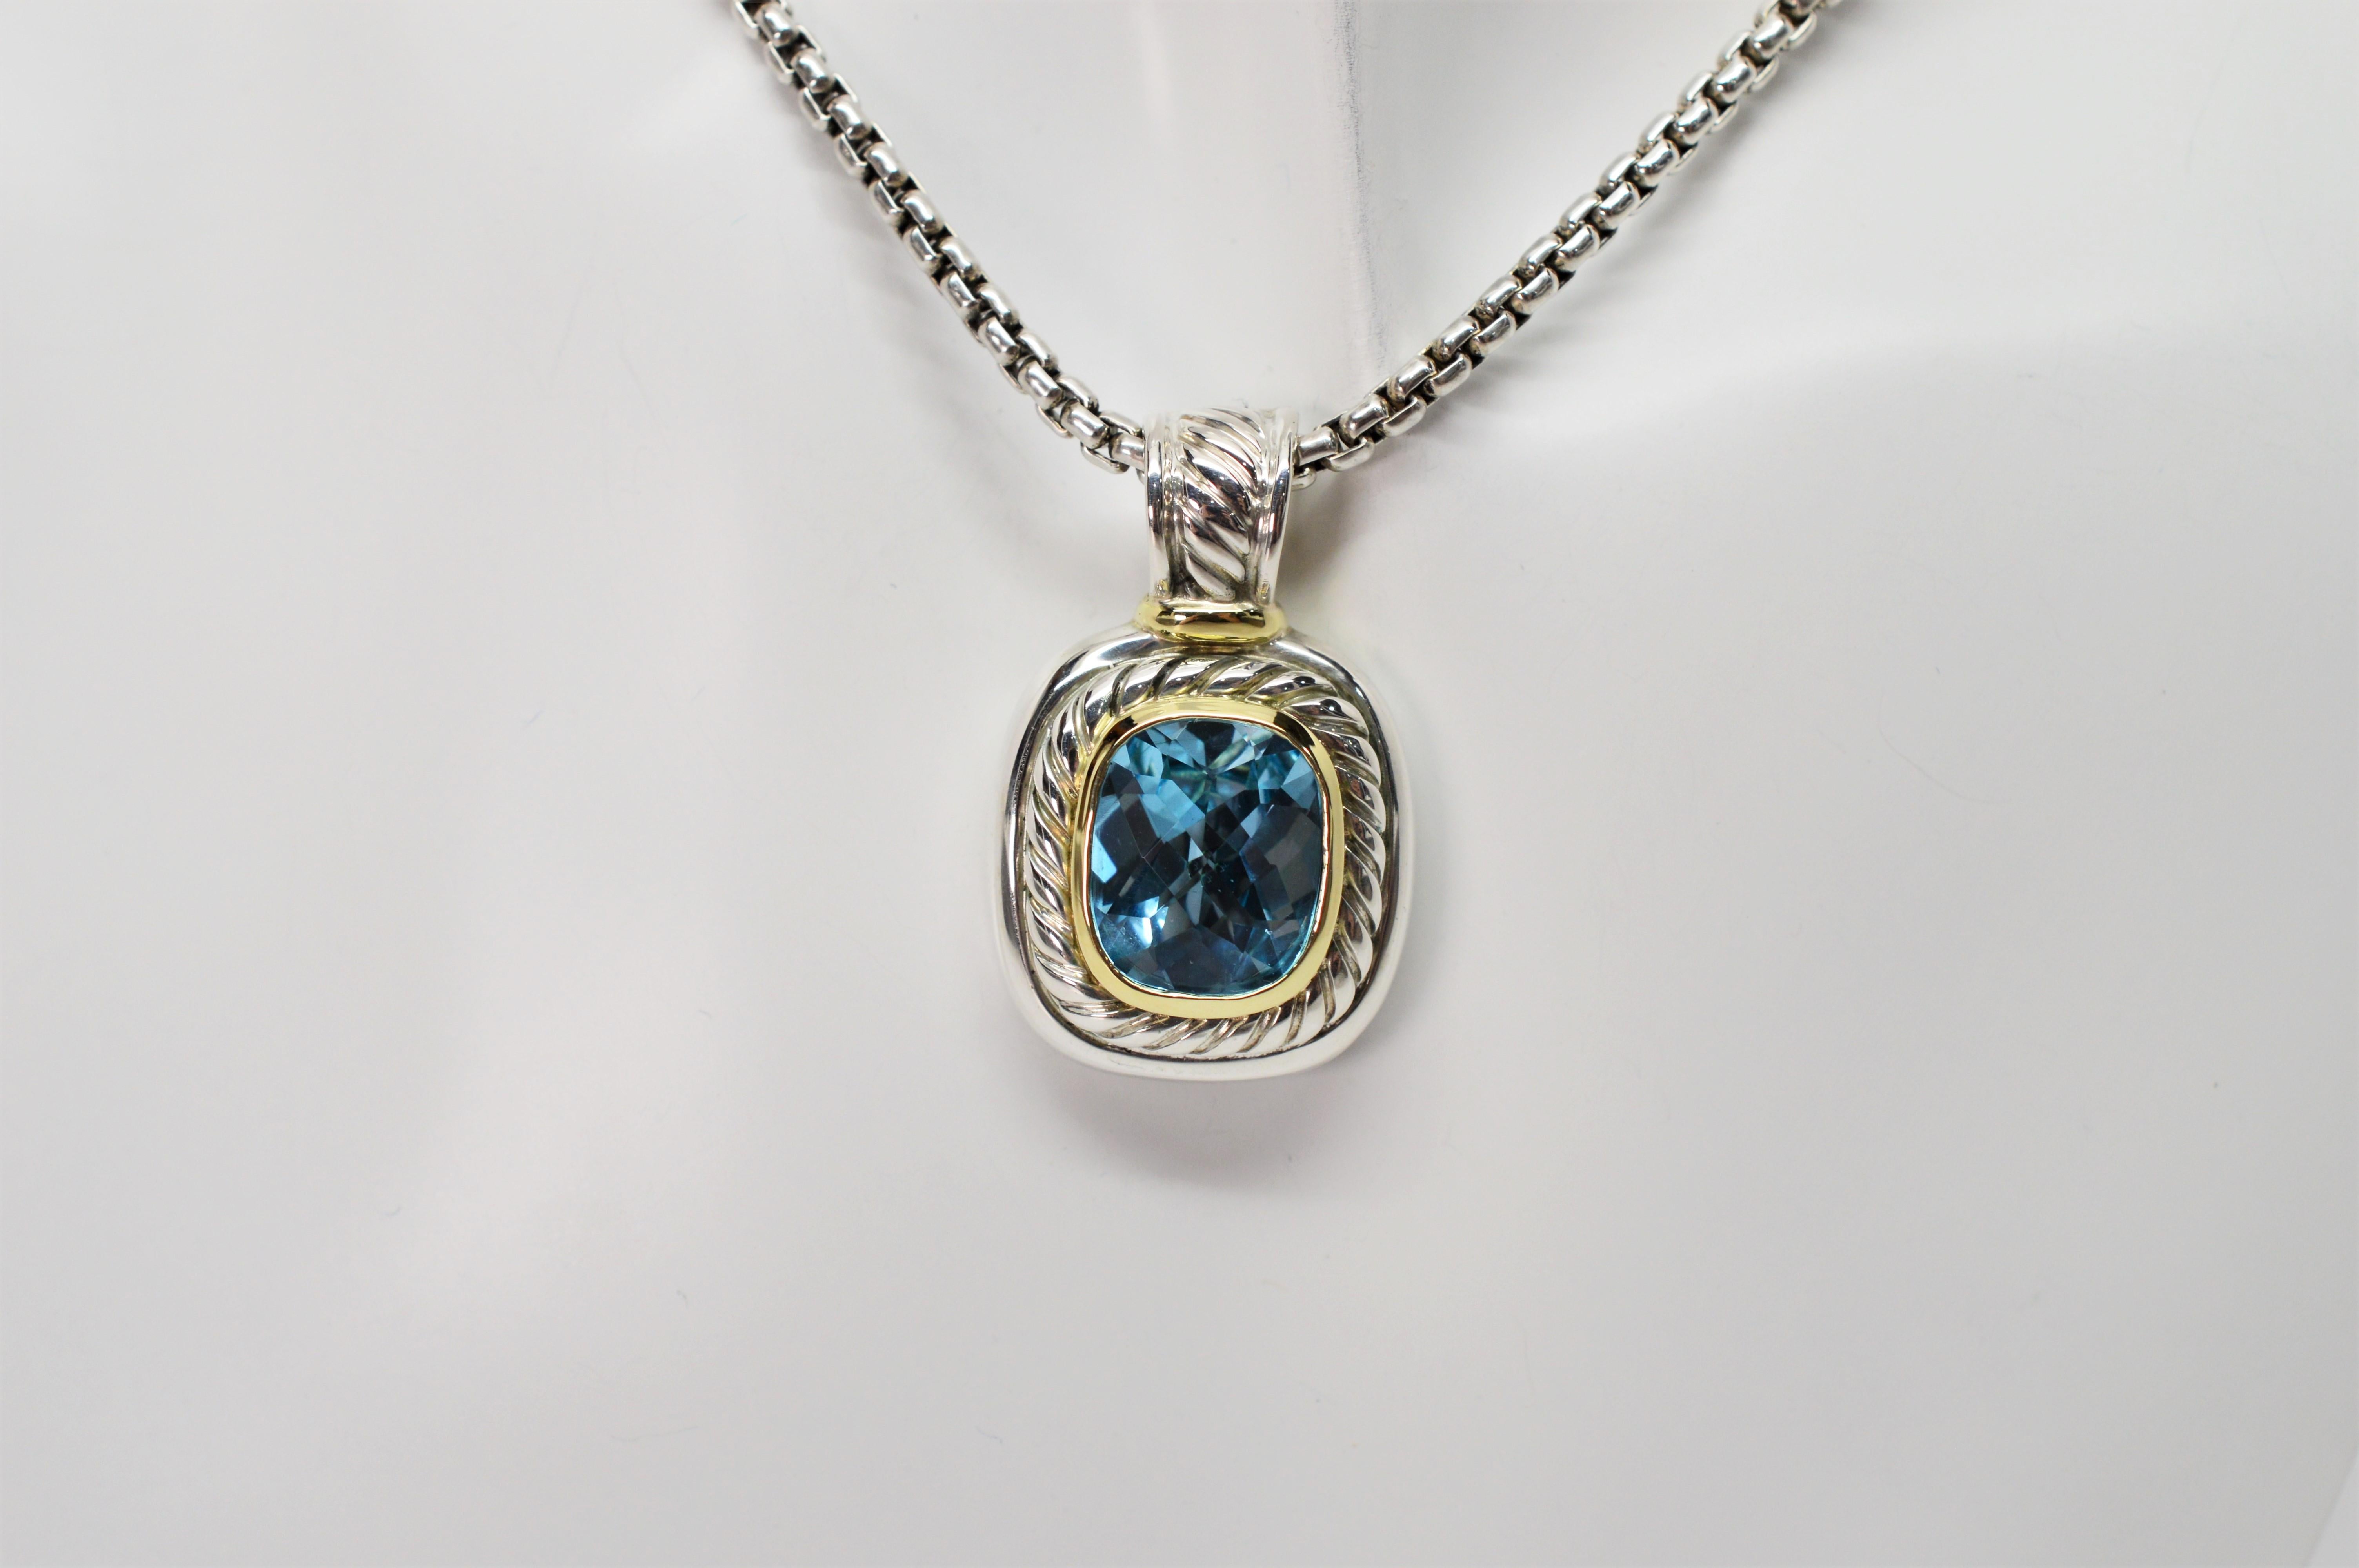 From the David Yurman Albion Collection, featuring a faceted vivid blue topaz, more than five carats, that has been bezel set in fourteen karat 14k yellow gold with a surrounding sterling silver cable design. The sterling silver pendant measures